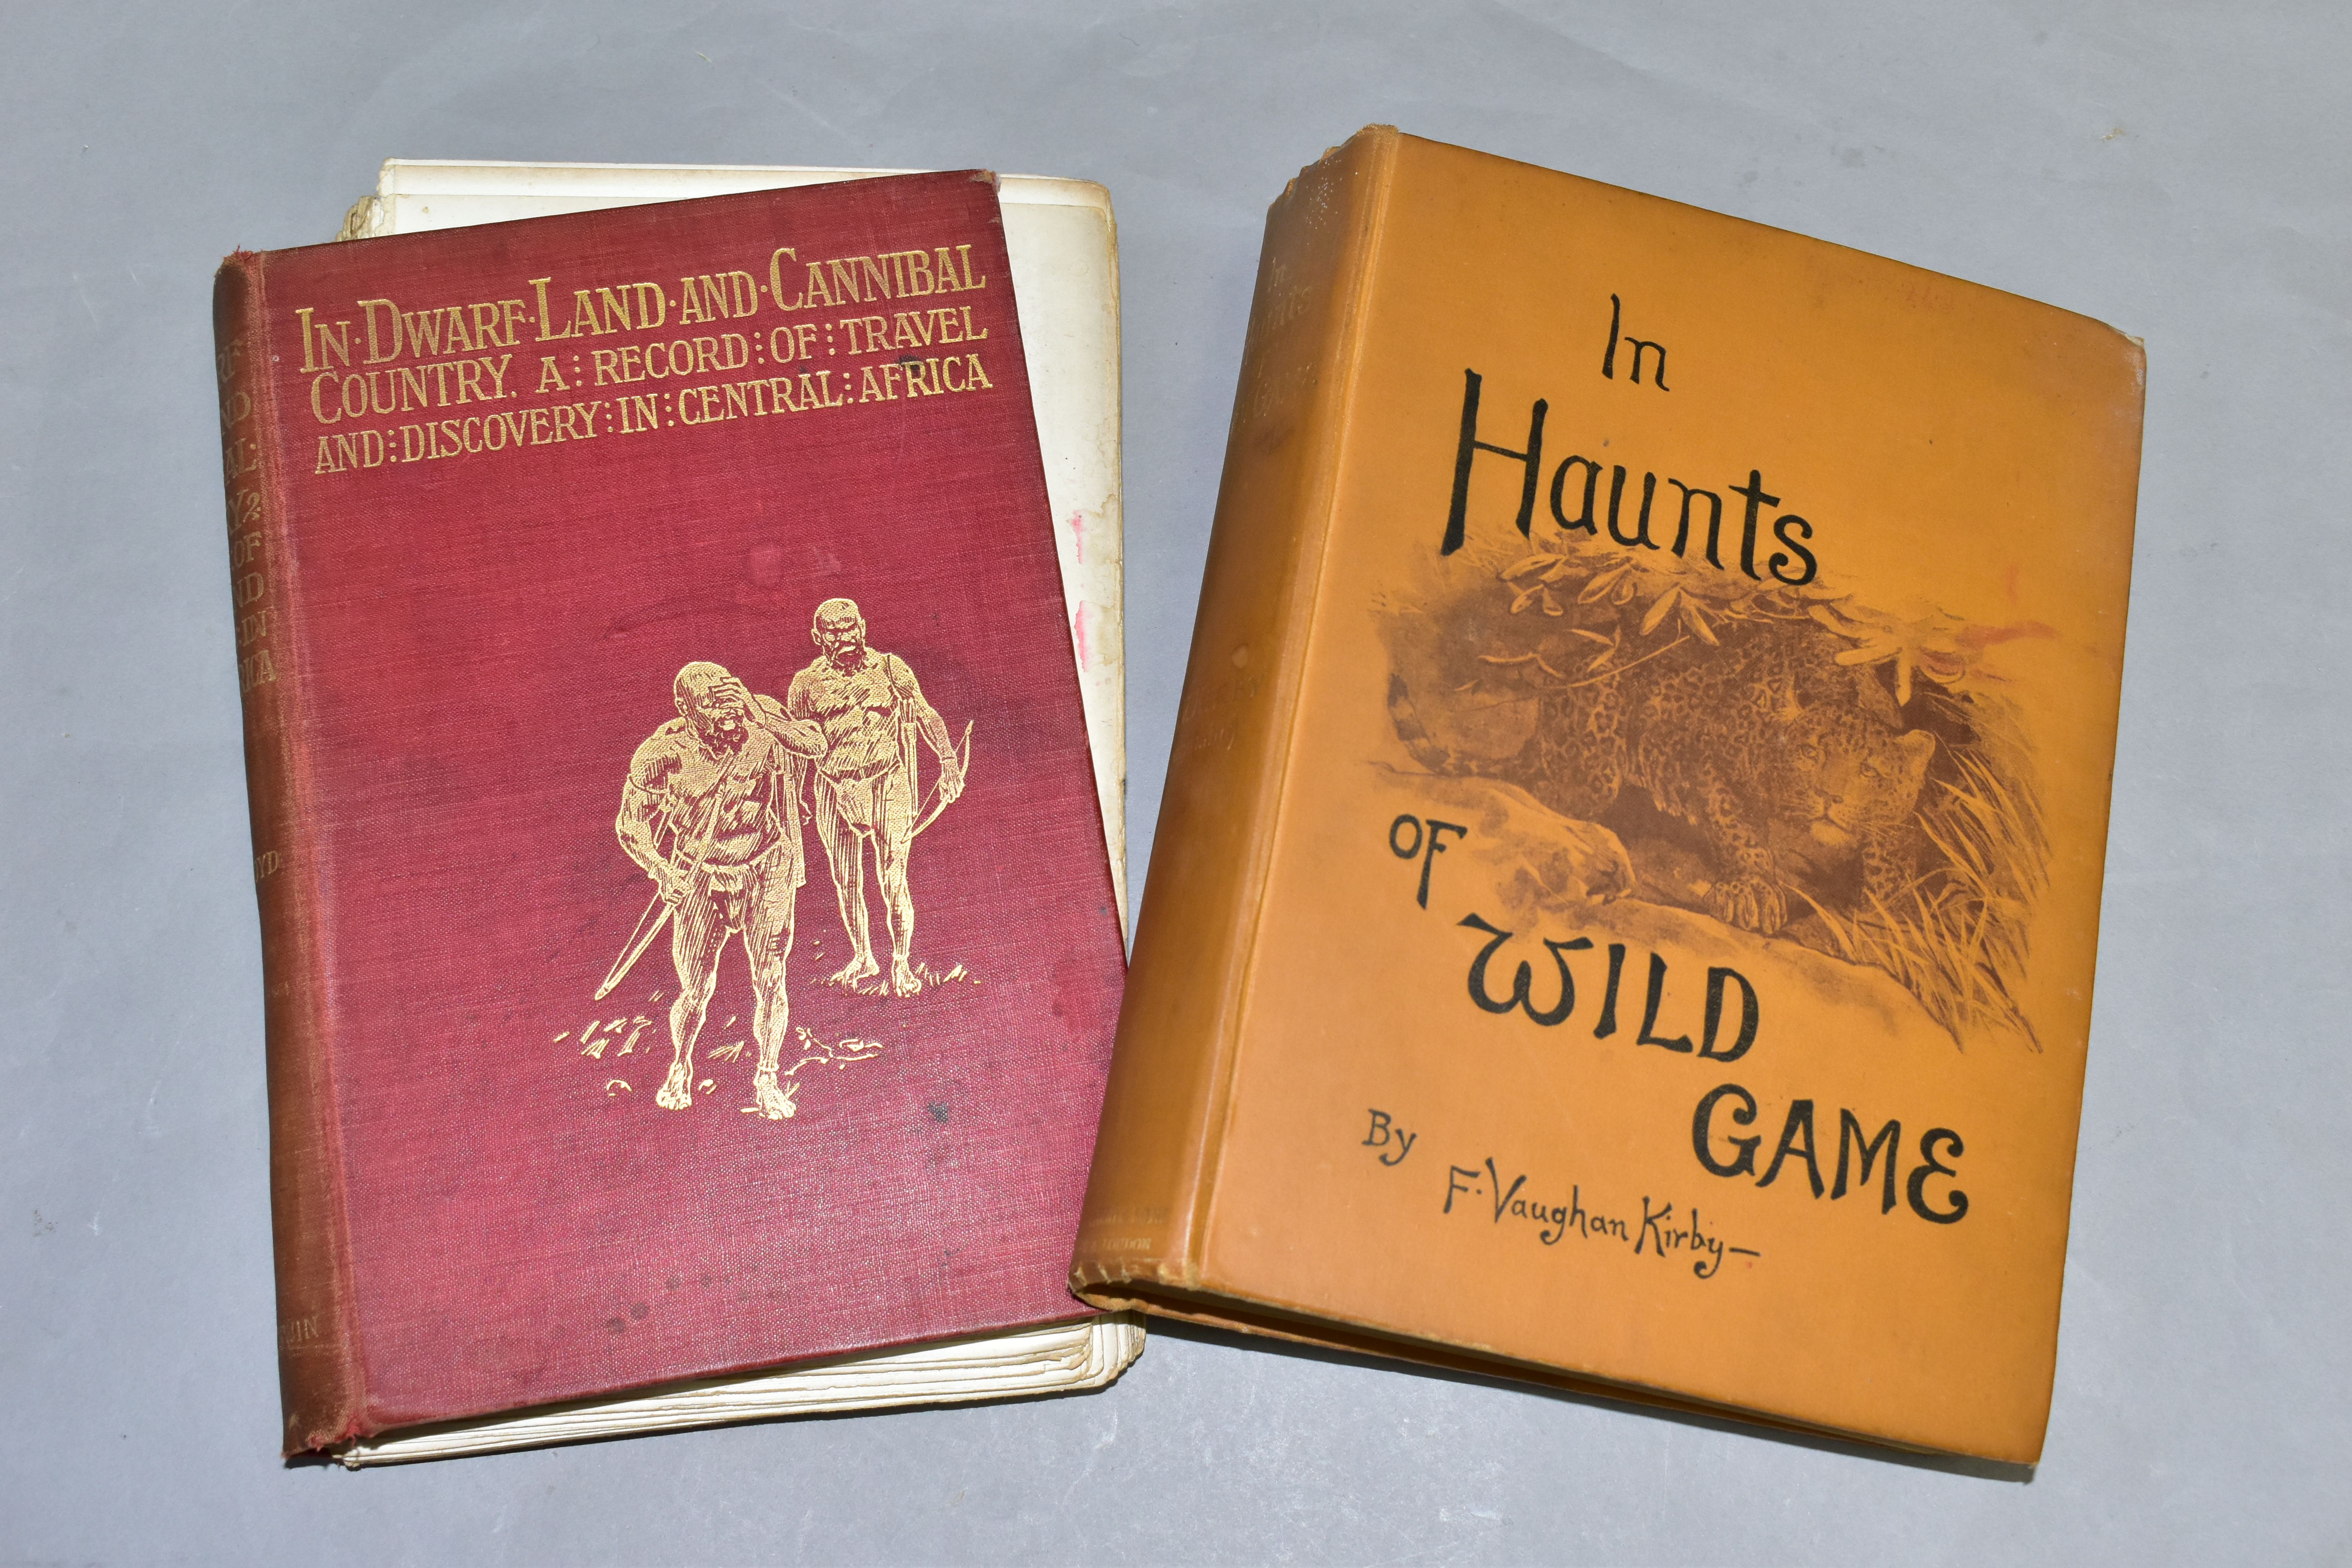 EXPLORATION, two titles, Frederick Vaughan Kirby, F.Z.S. (Maqaqamba) IN HAUNTS OF WILD GAME, A - Image 2 of 9